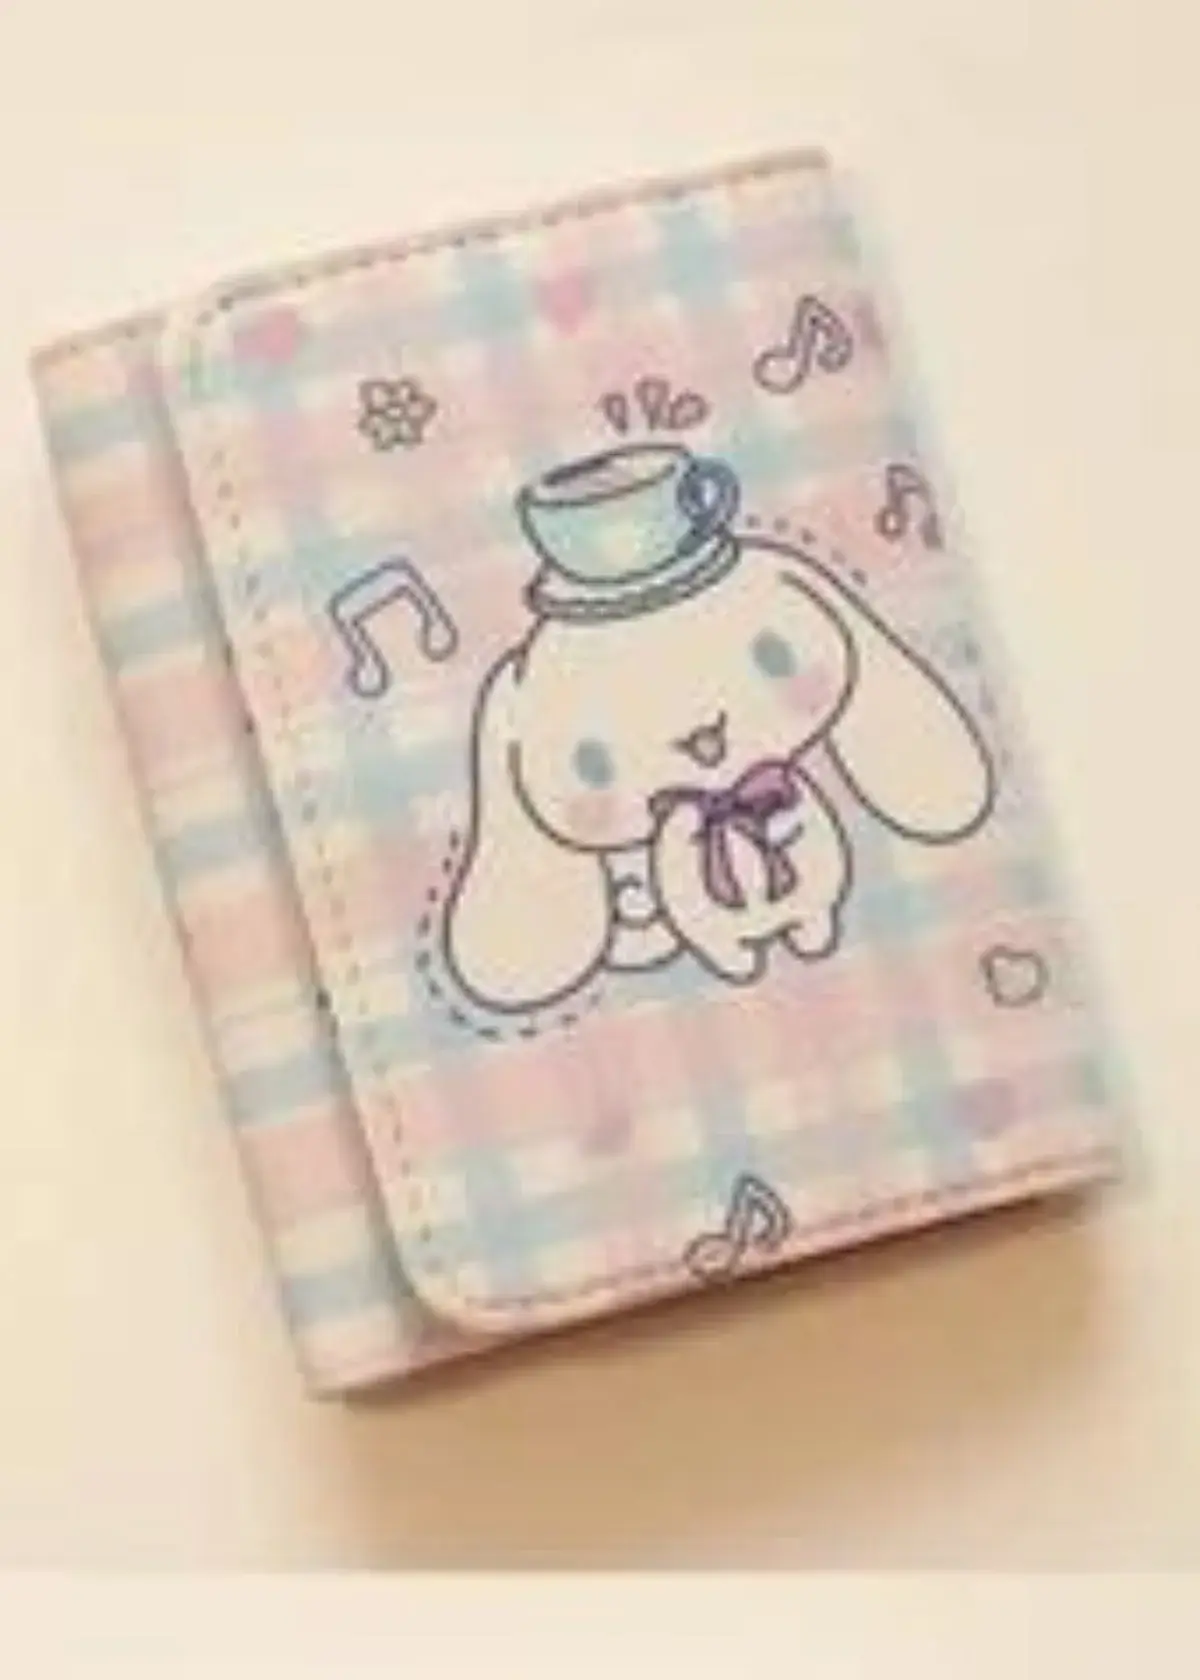 What are the dimensions of a typical Cinnamoroll wallet?